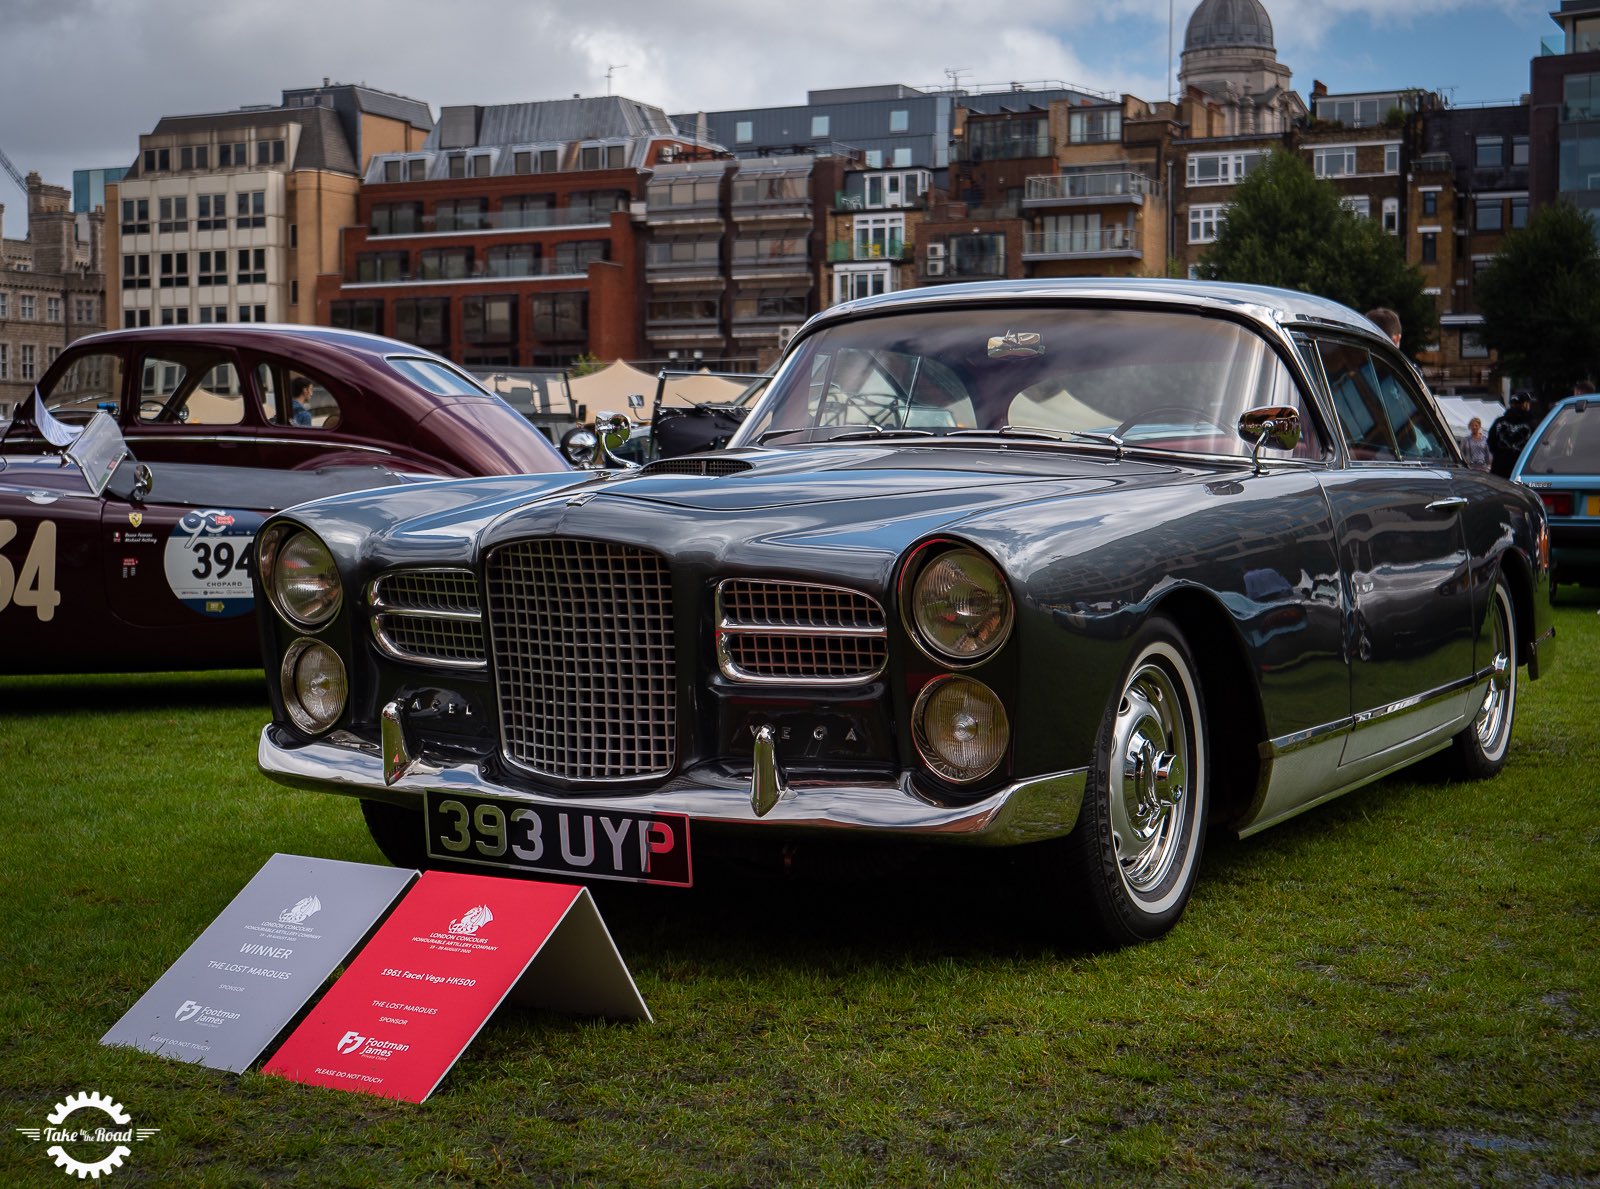 London Concours 2020 makes welcome return to the capital